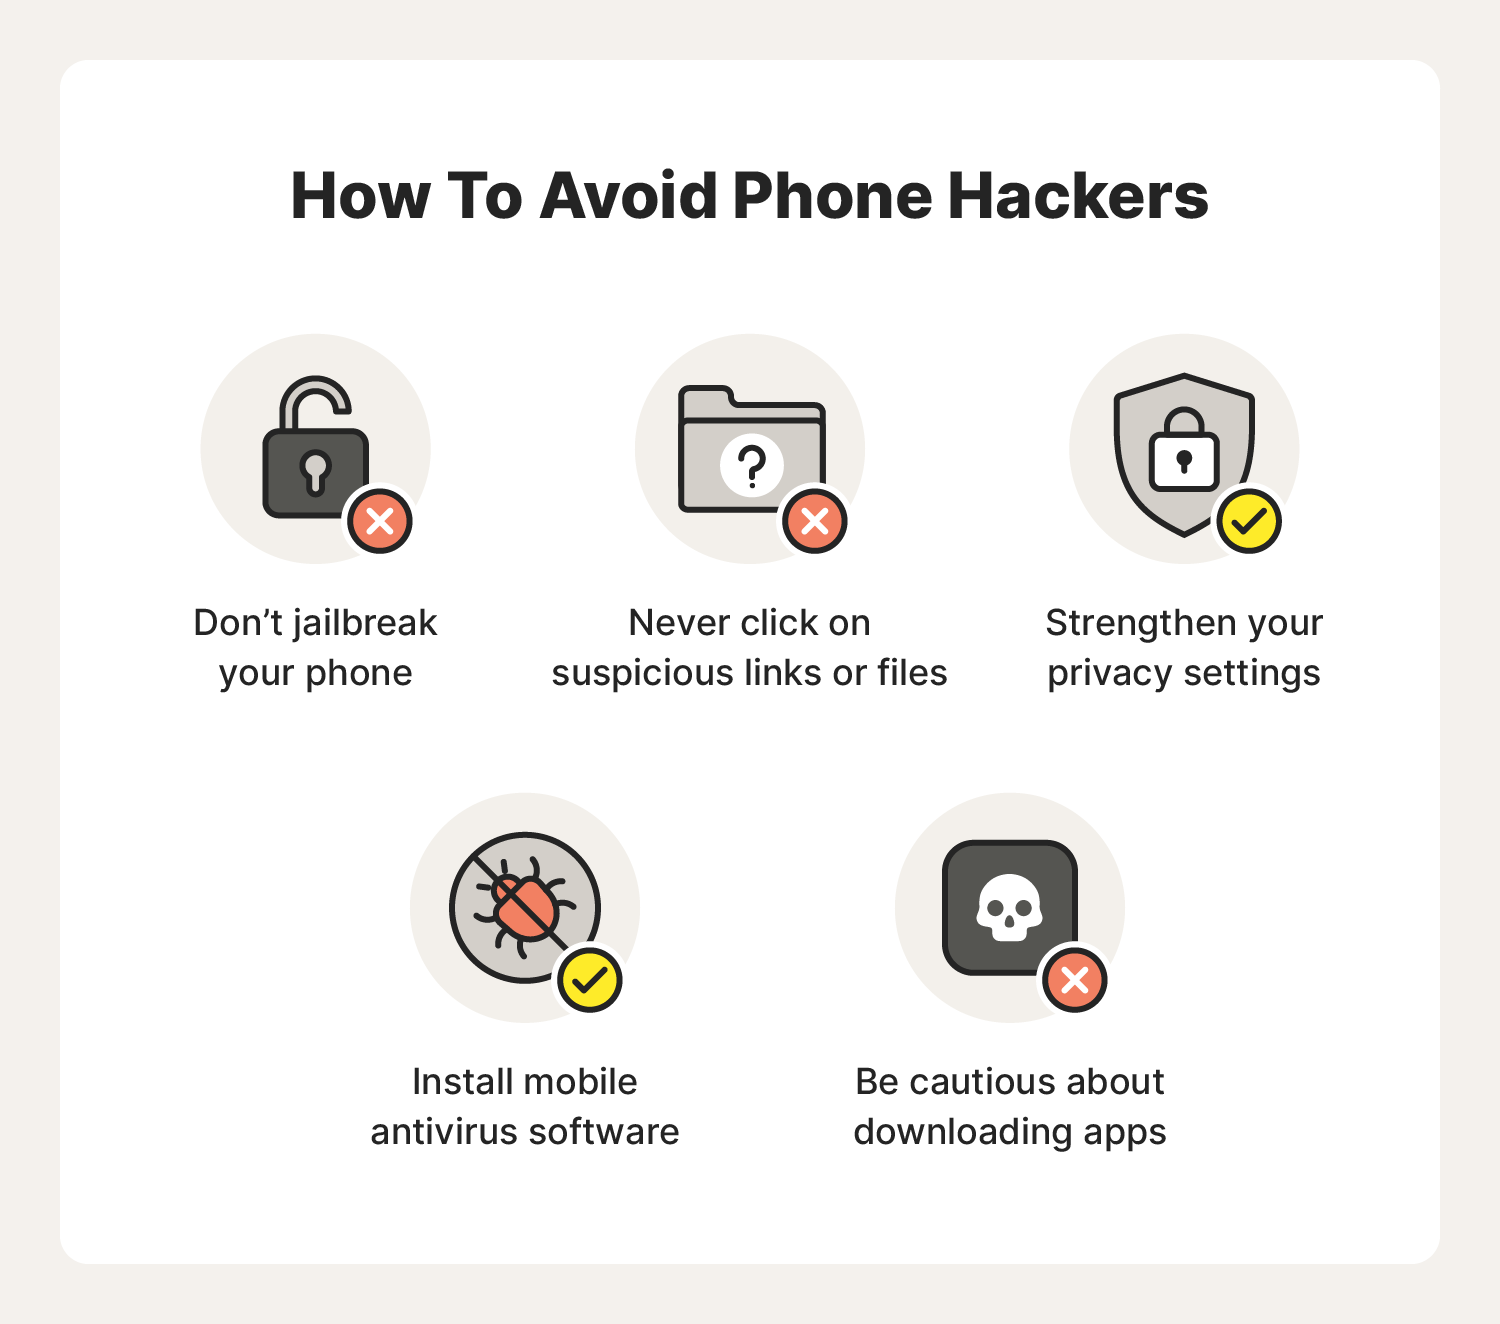 How to remove a hacker from my phone - Norton